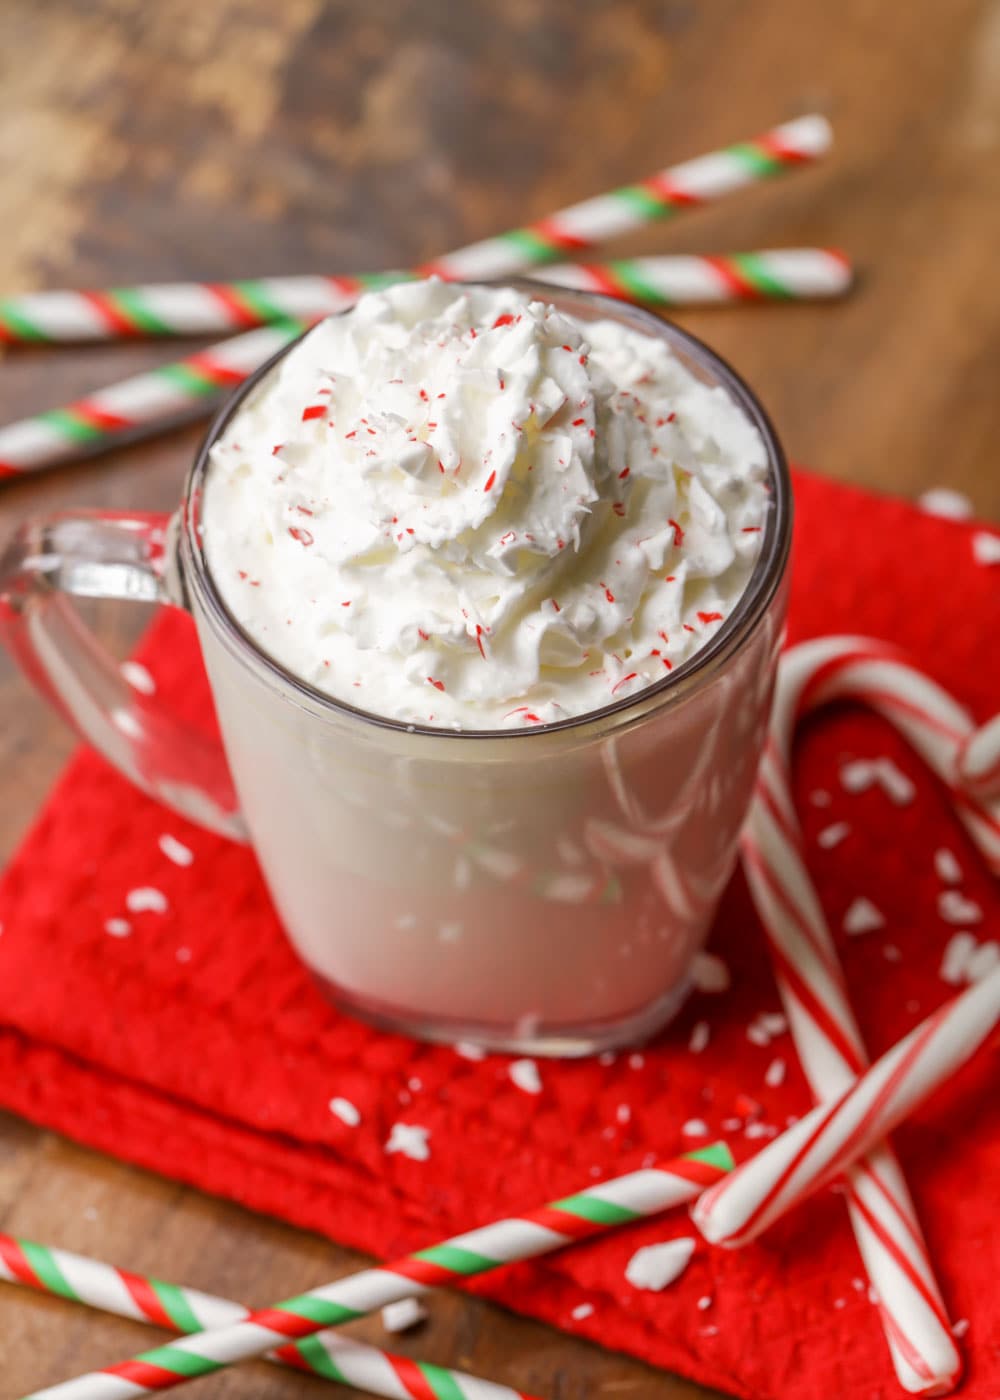 Holiday drink recipes - peppermint hot cocoa topped with whipped cream and crushed candy canes.